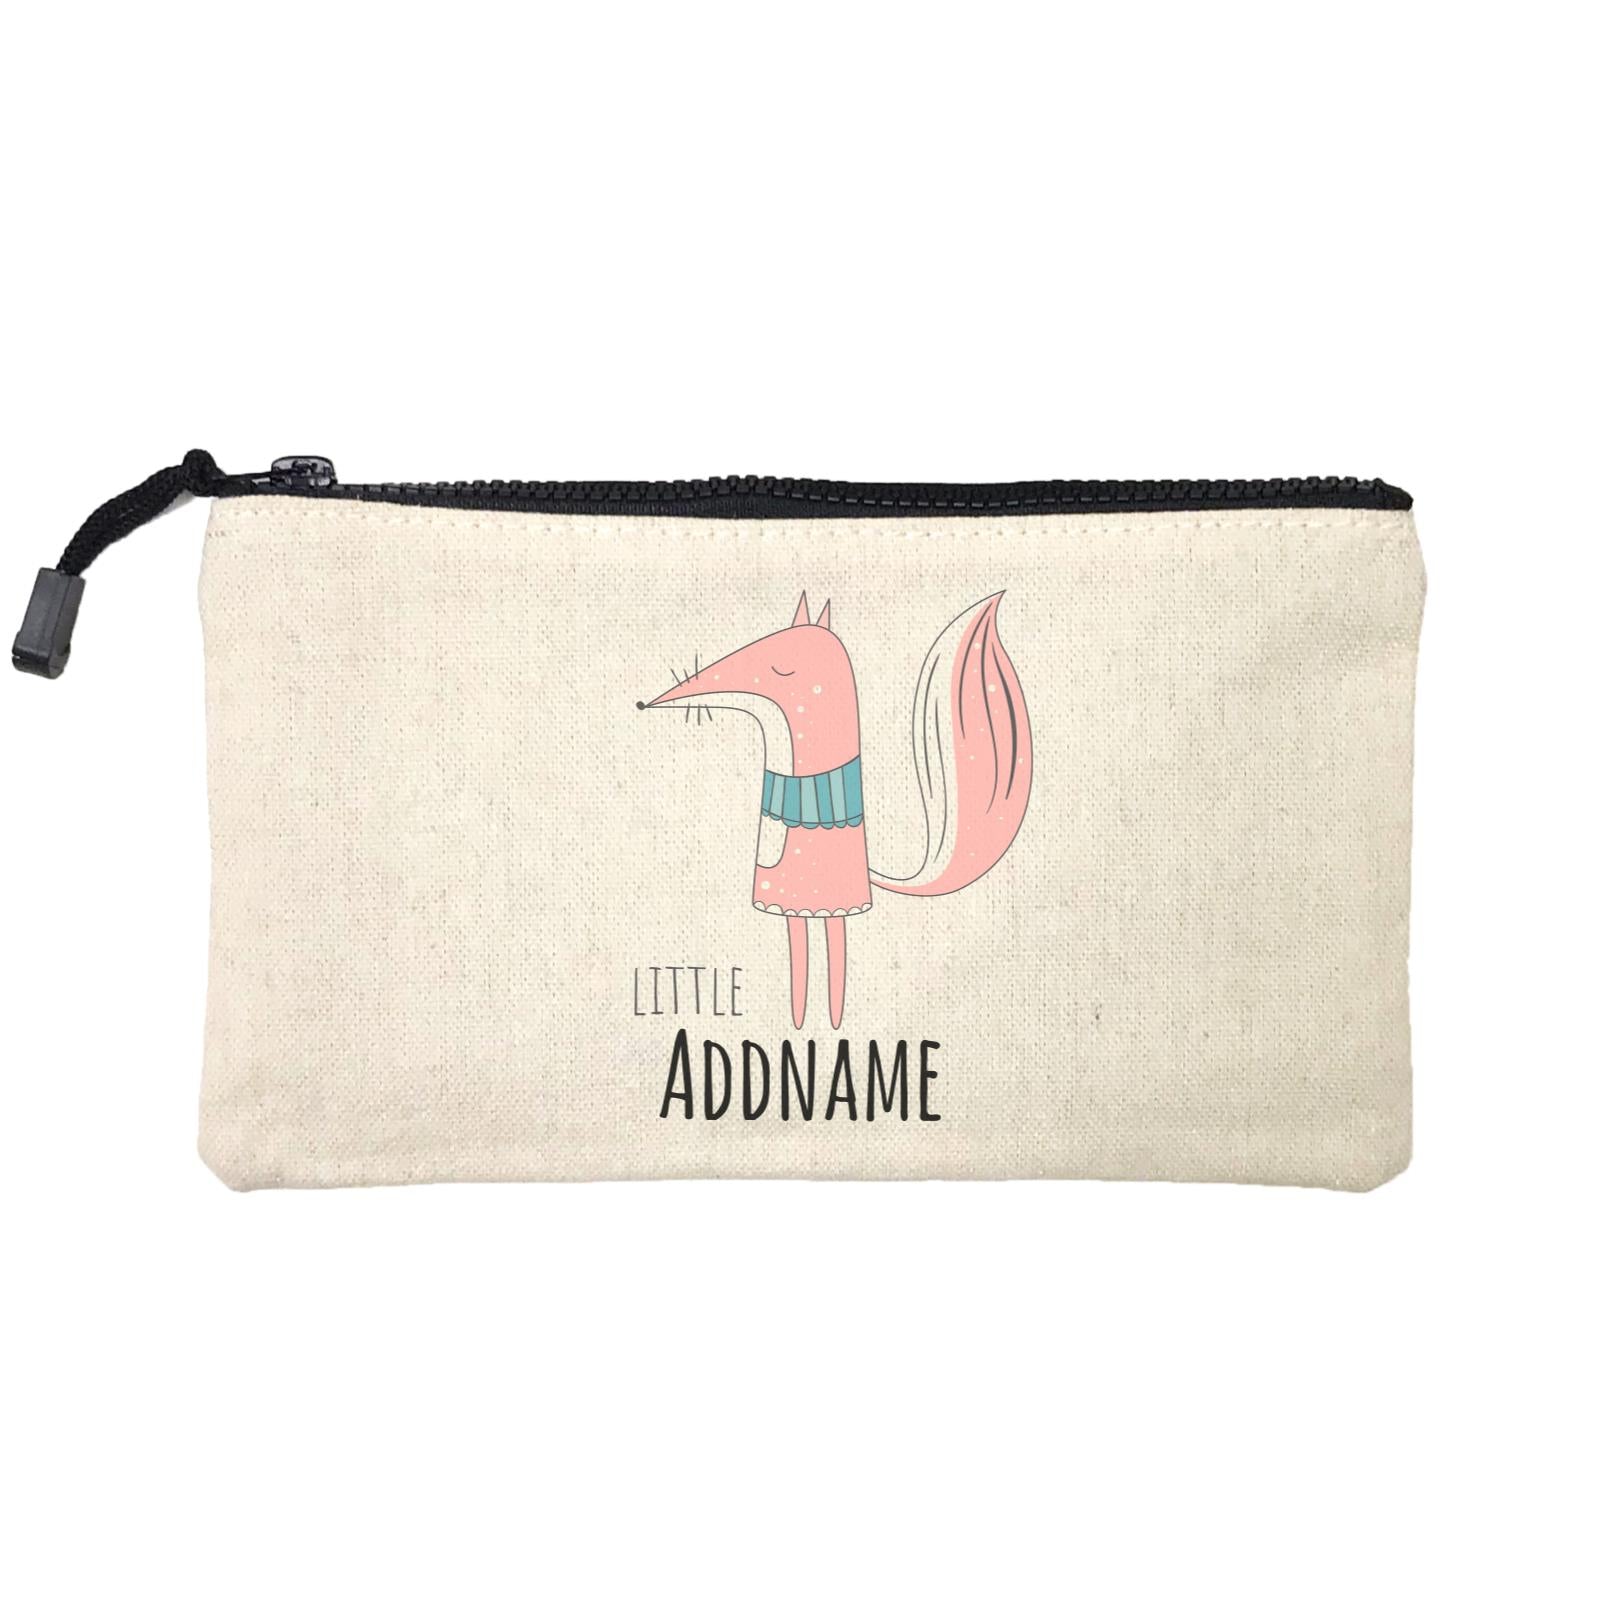 Drawn Adorable Animals Fox Little Addname Mini Accessories Stationery Pouch